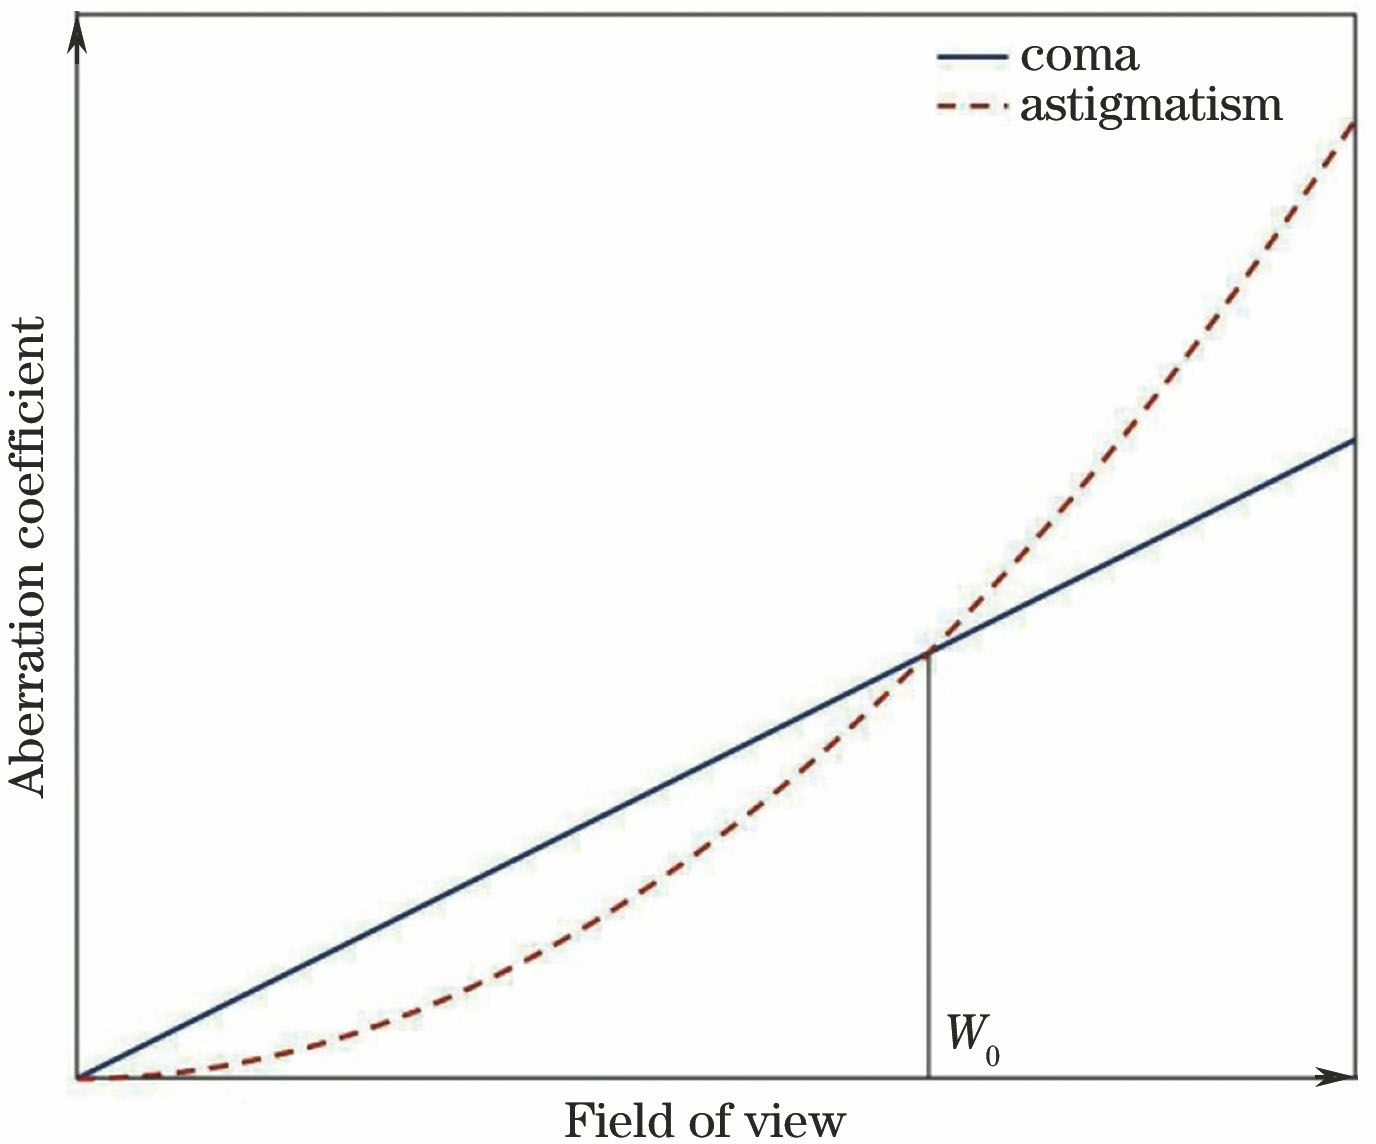 Relationship between contributions of coma and astigmatism to diffuse spot and field of view